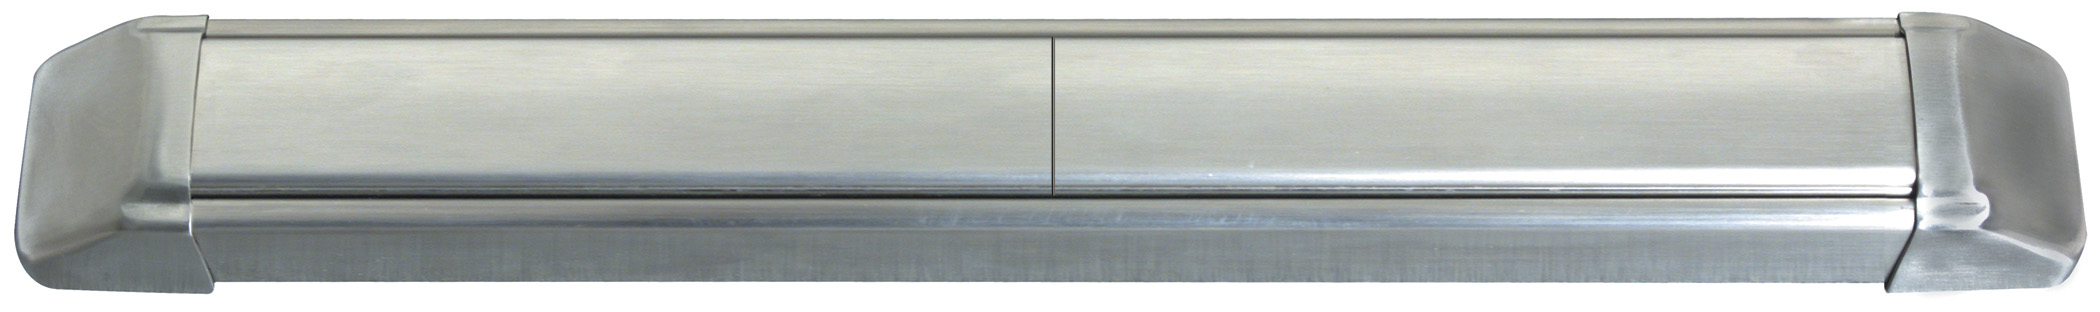 STANDARD DUMMY PUSH BAR WITH END CAPS SP/DT HIGH CURRENT REX SWITCH UPTO 2A